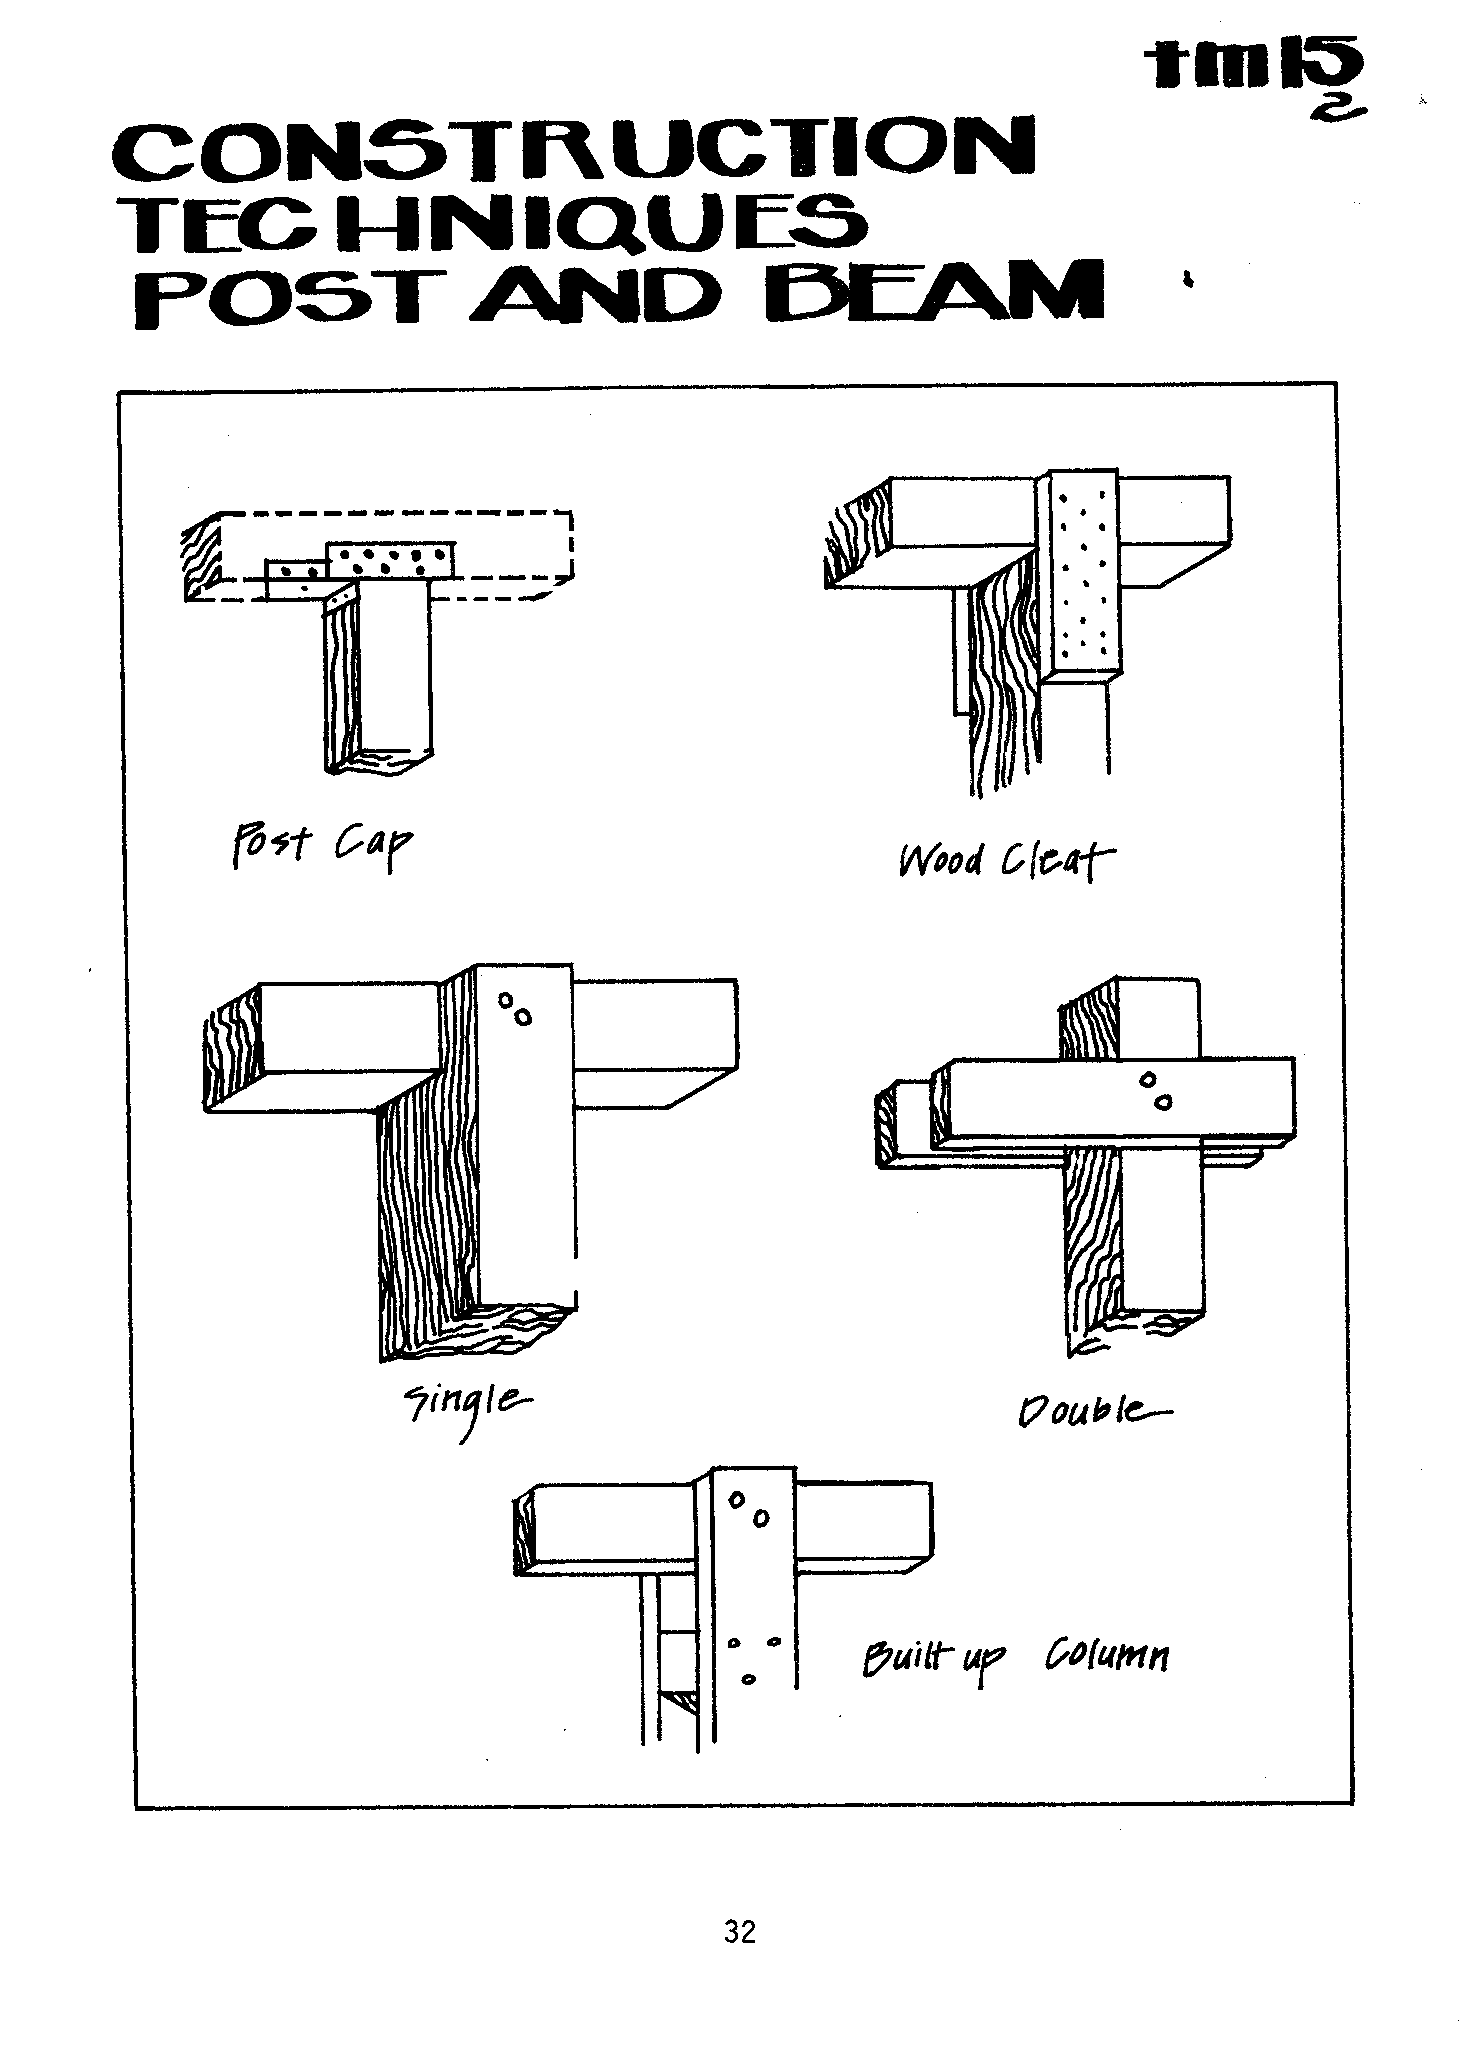 Post and Beam Construction Techniques